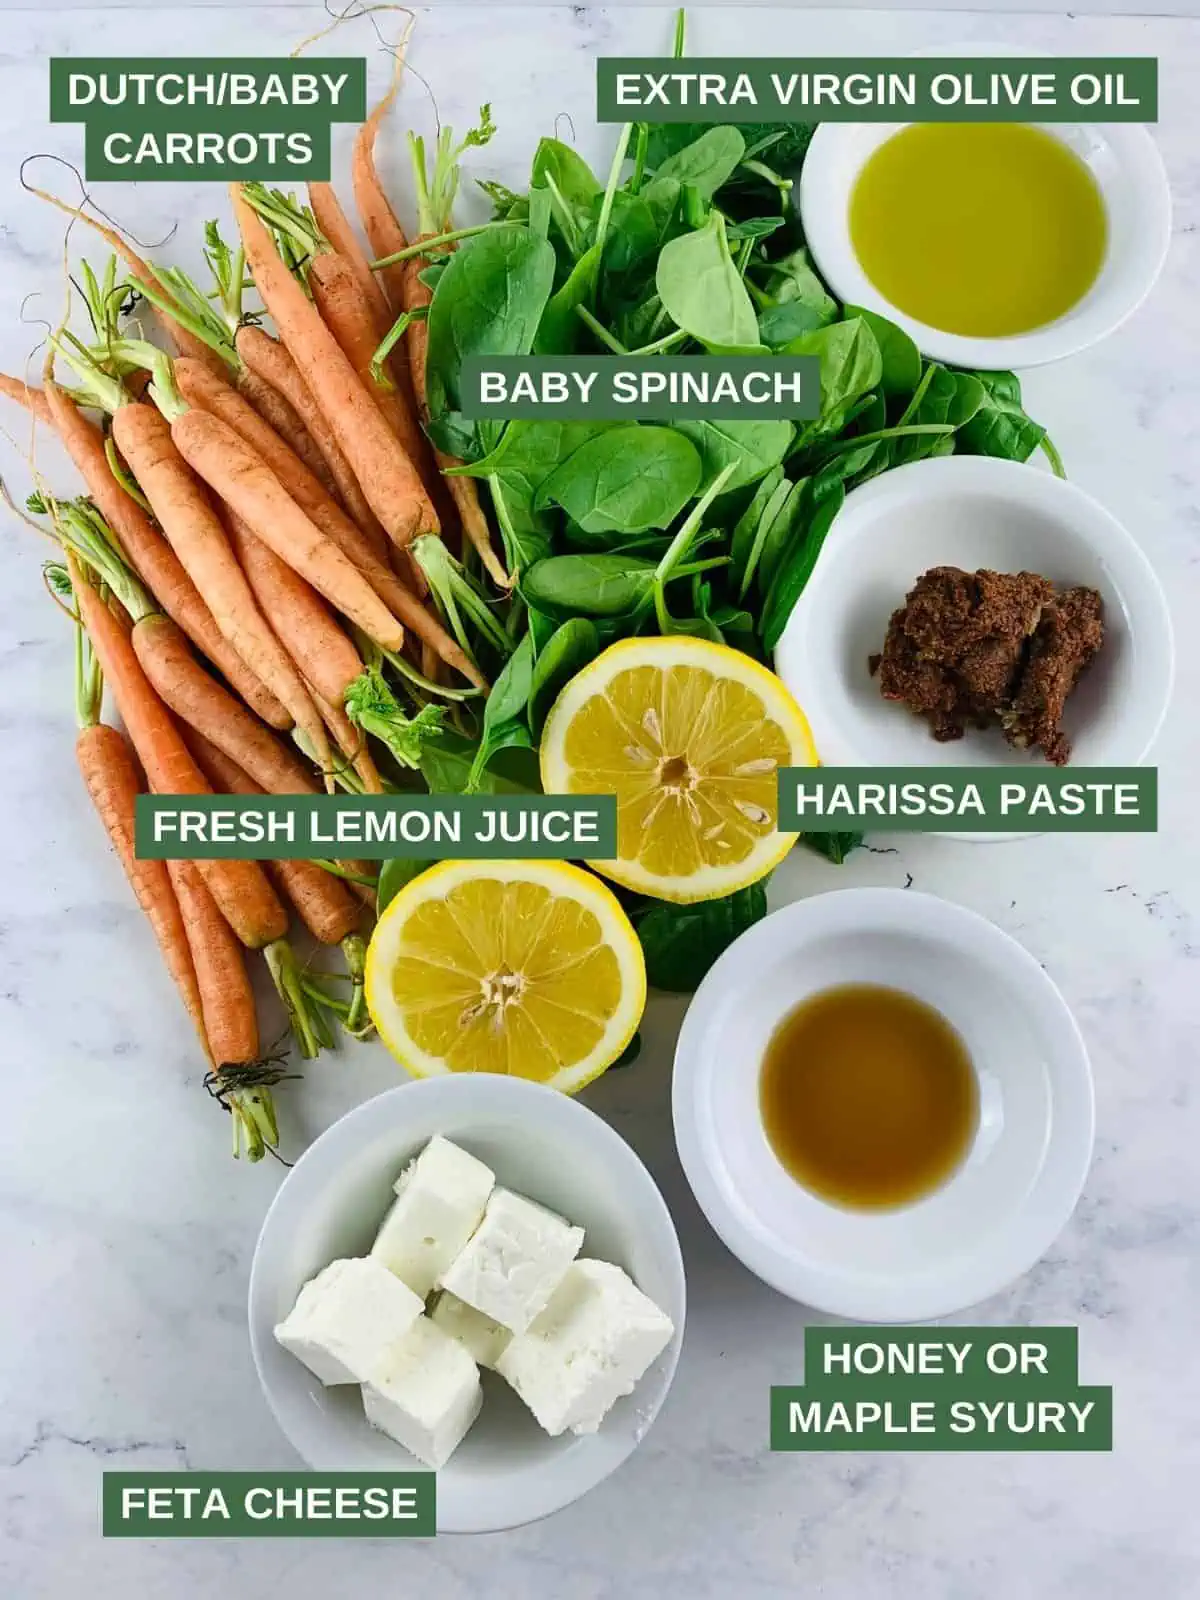 Labelled ingredients needed to make honey harissa carrots.